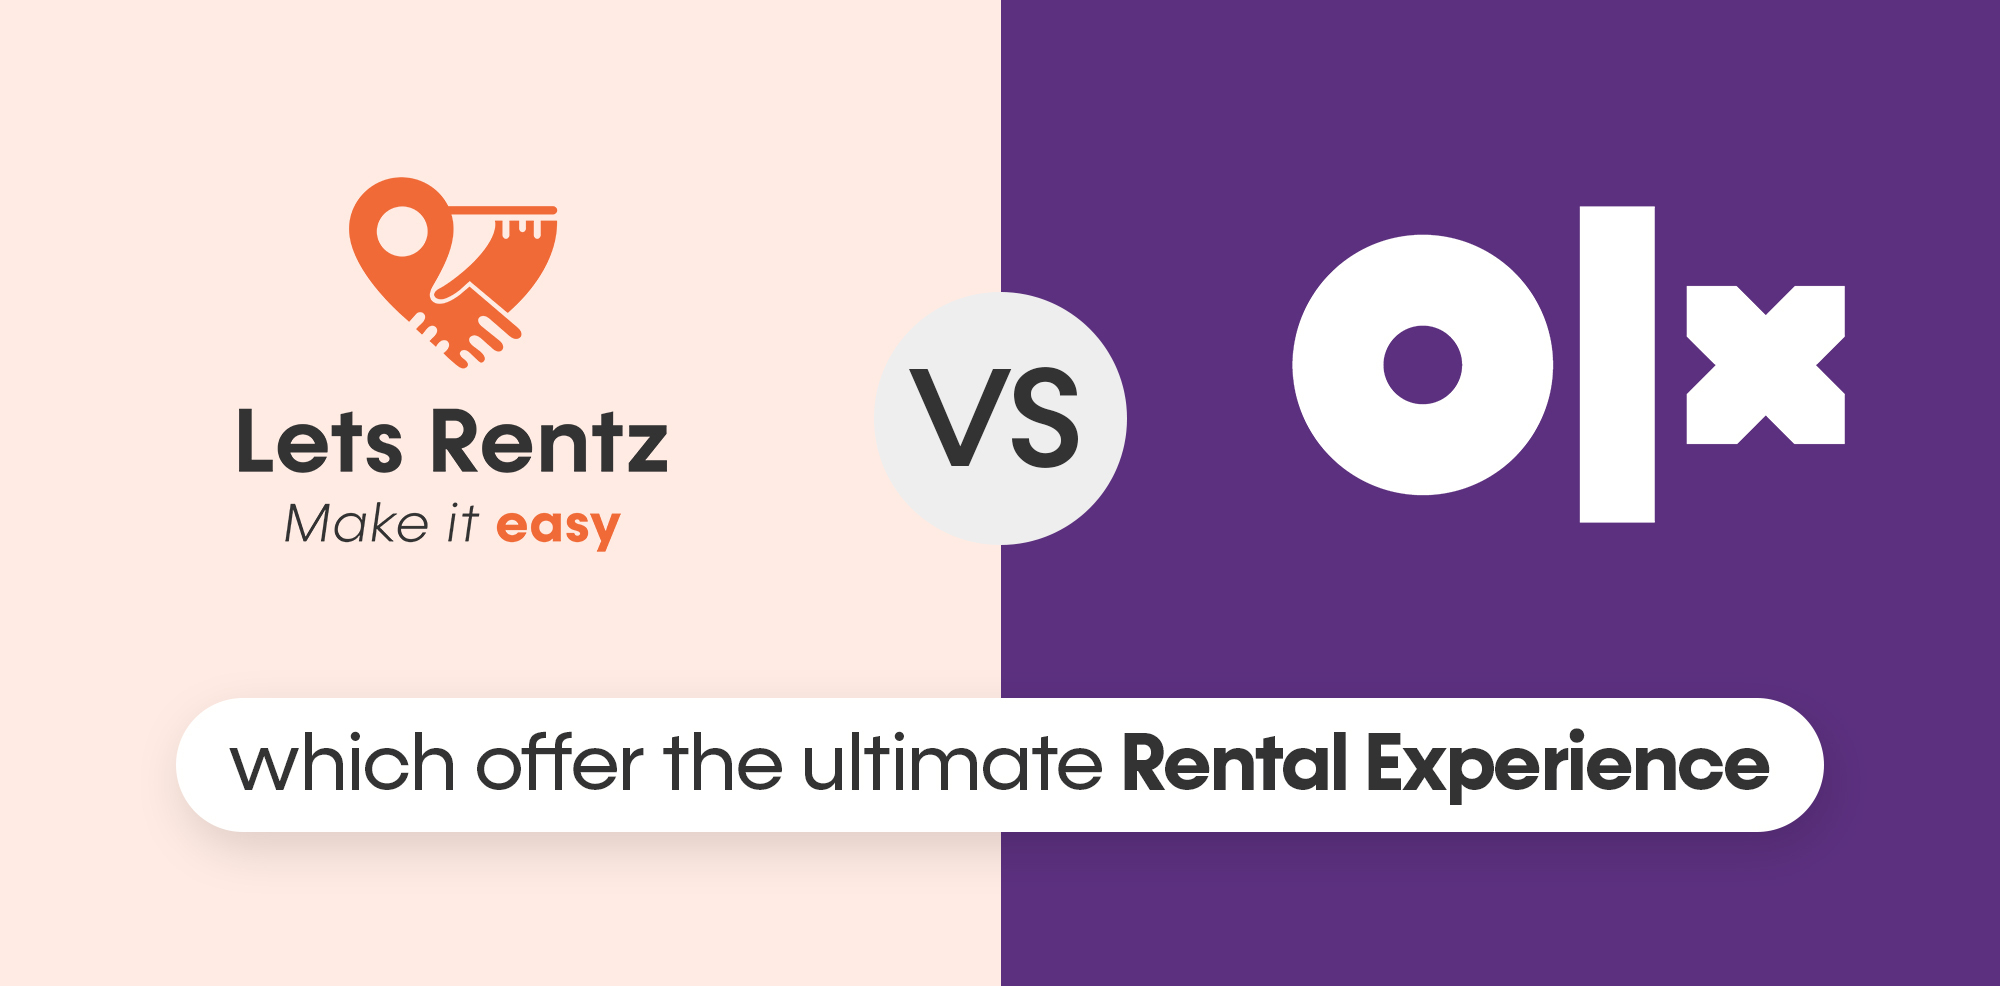 Lets Rentz or OLX: which offer the ultimate rental experience?